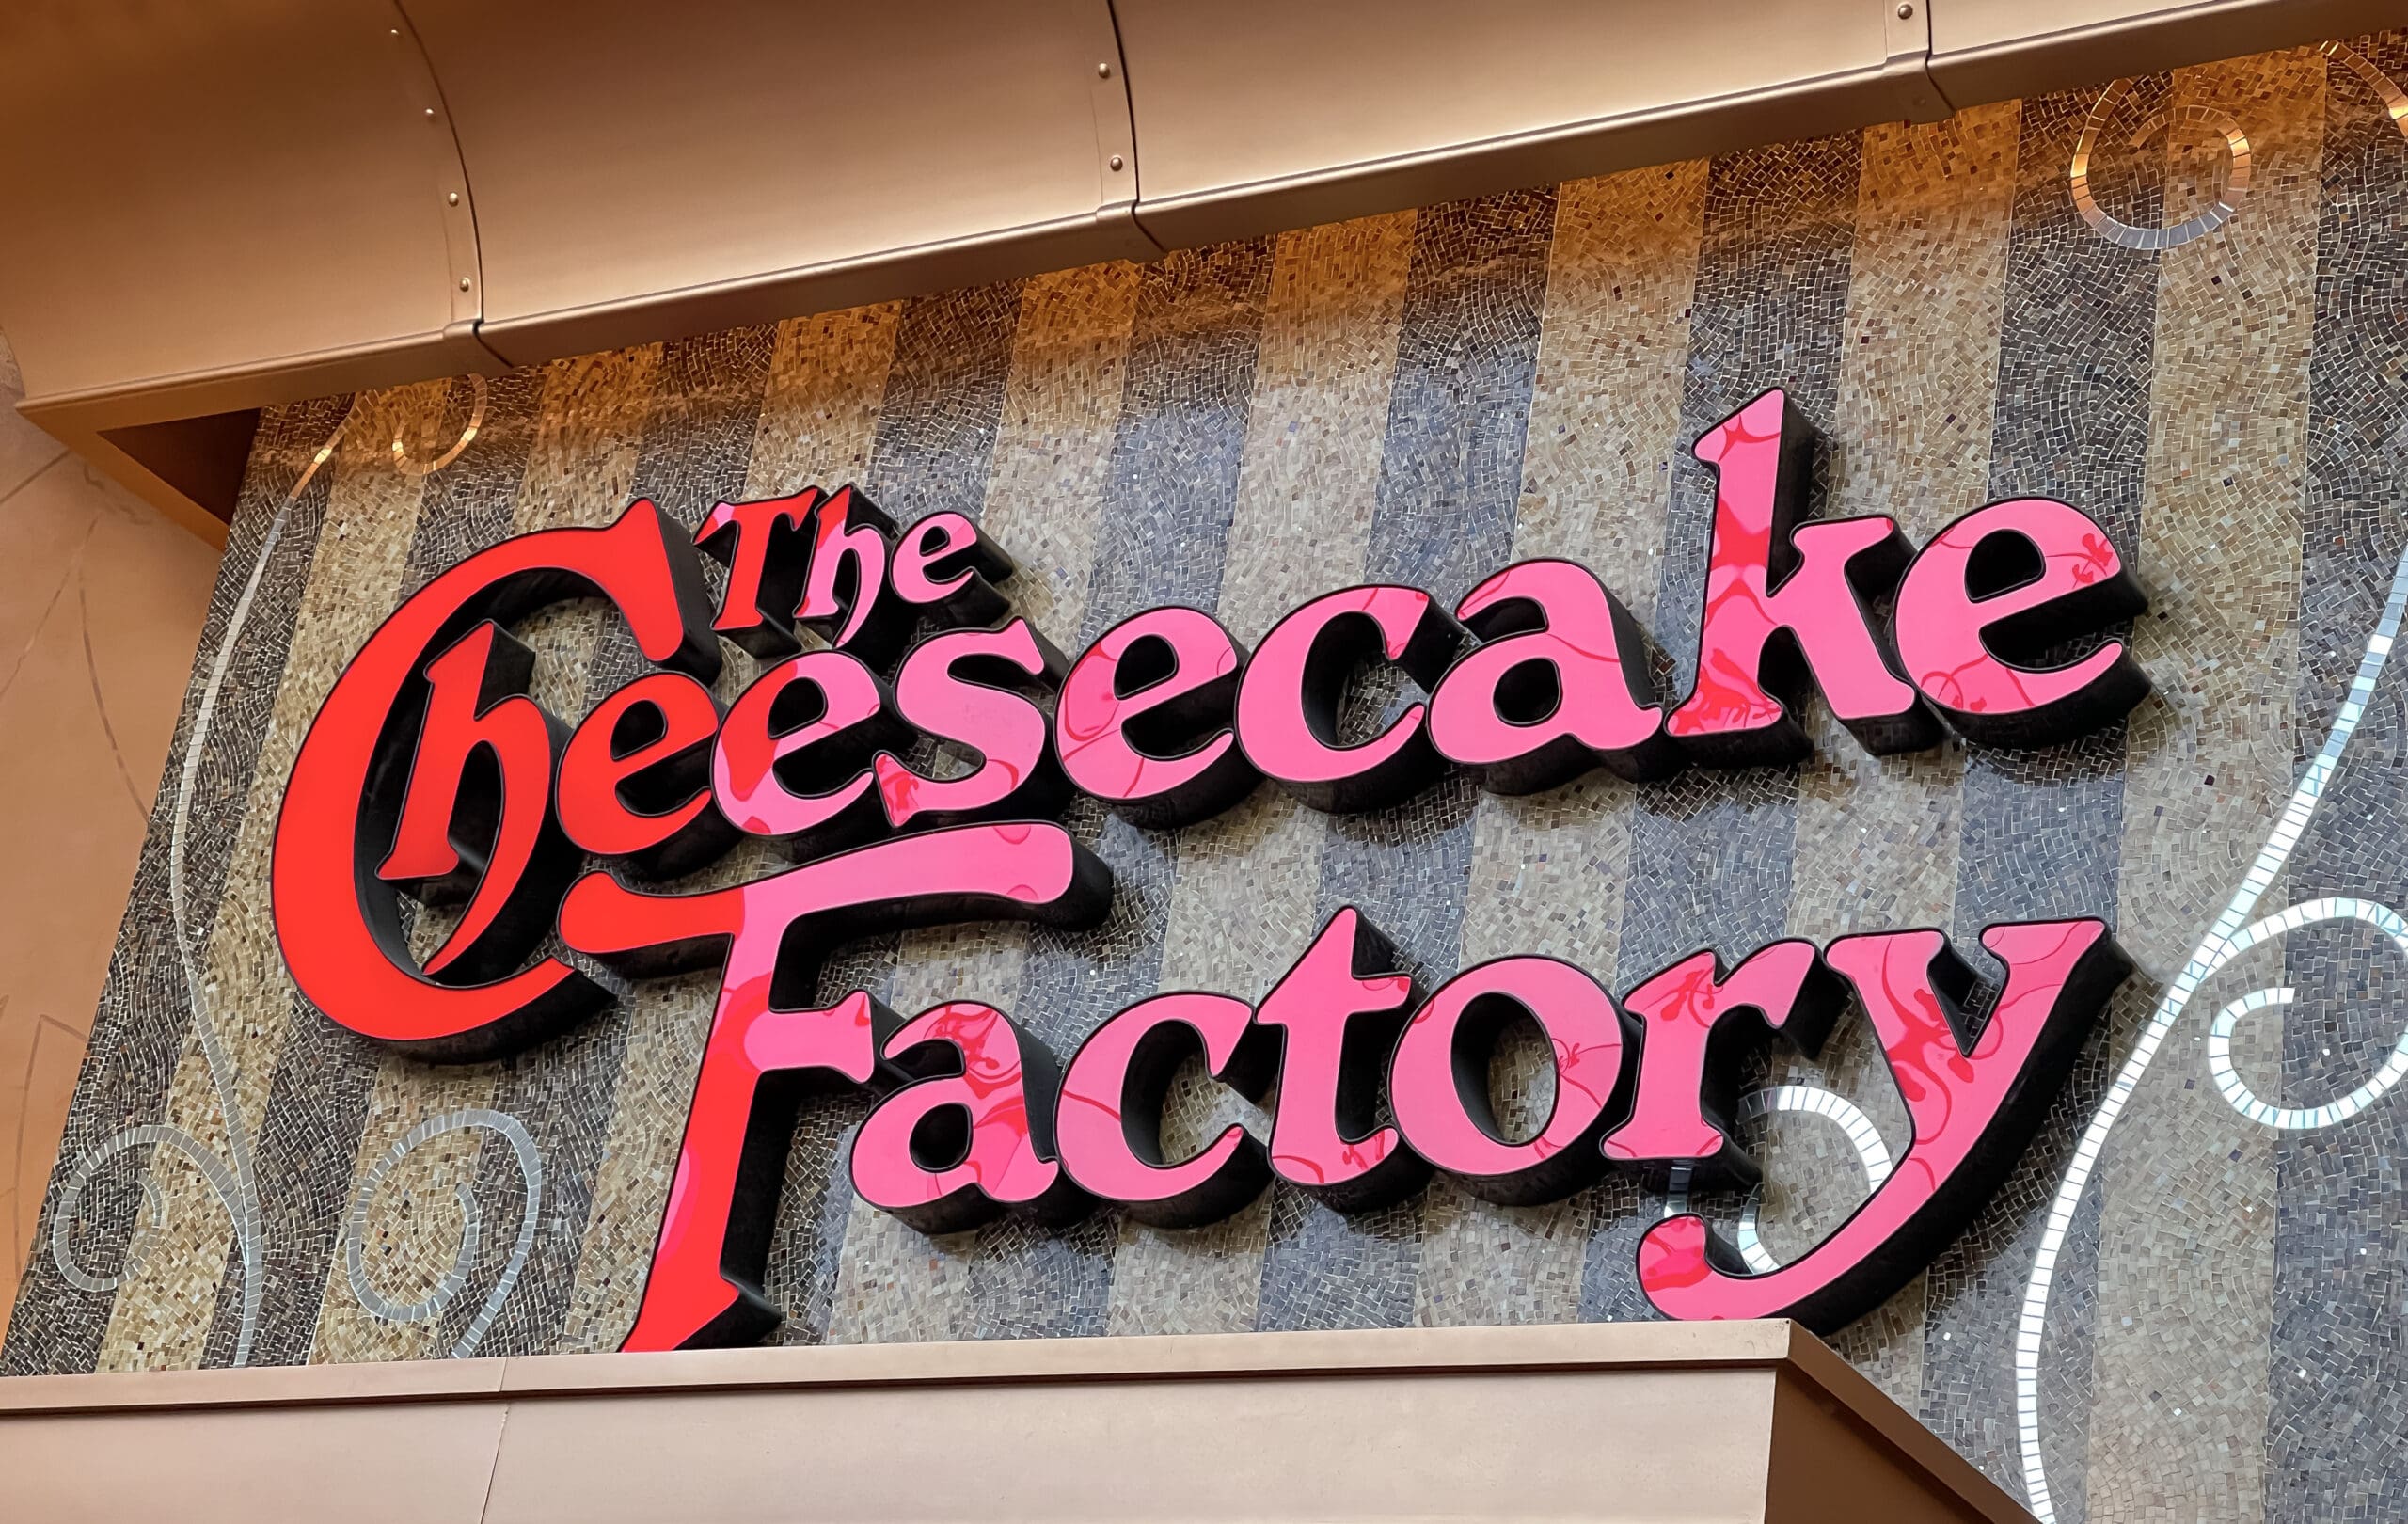 A Delightful Dive Into The Cheesecake Factory’s Diverse Menu